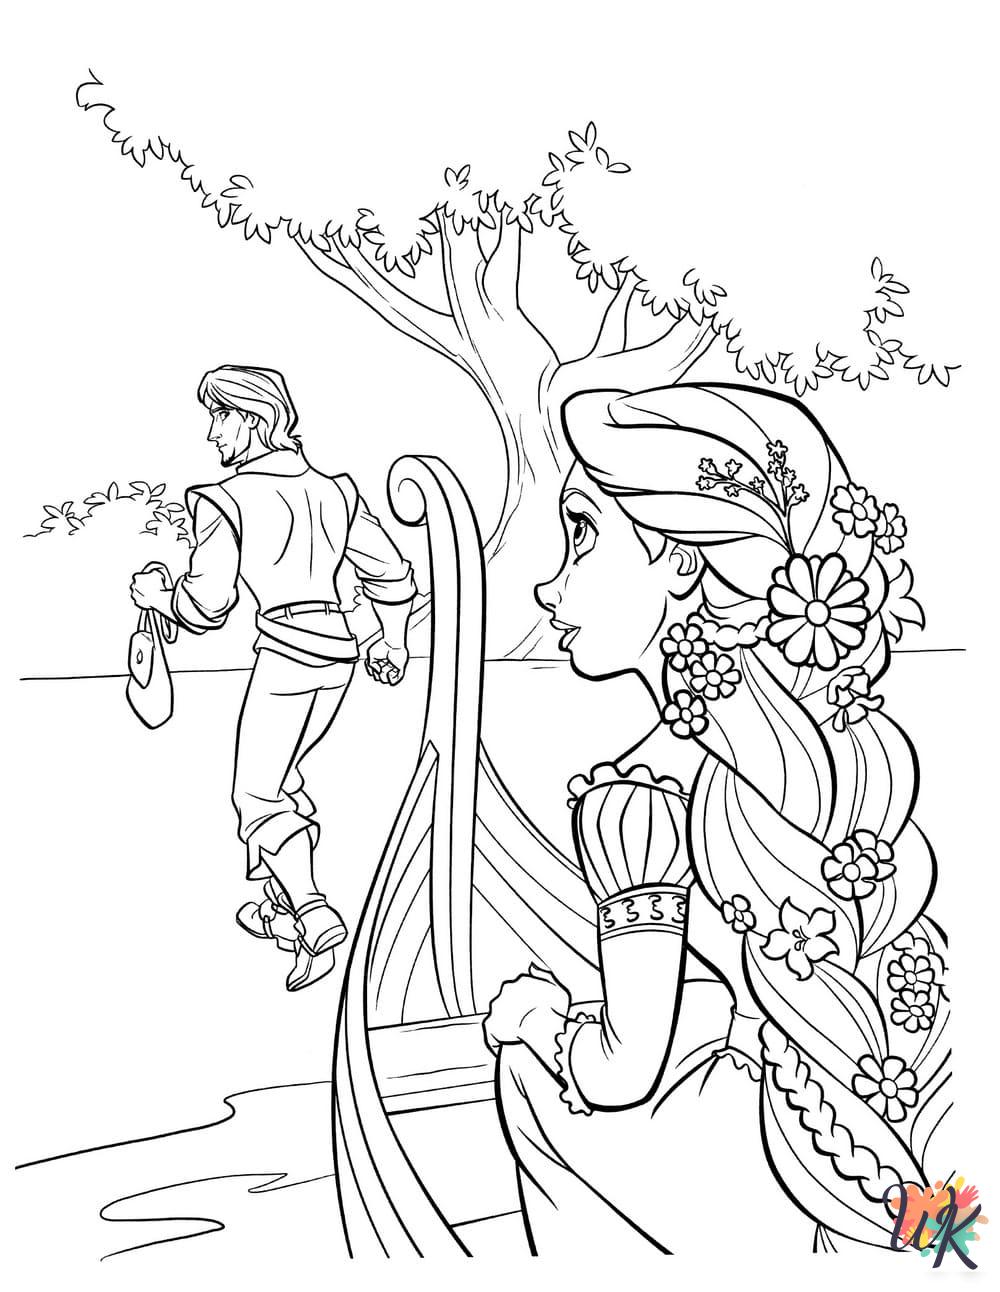 Tangled coloring pages for adults pdf